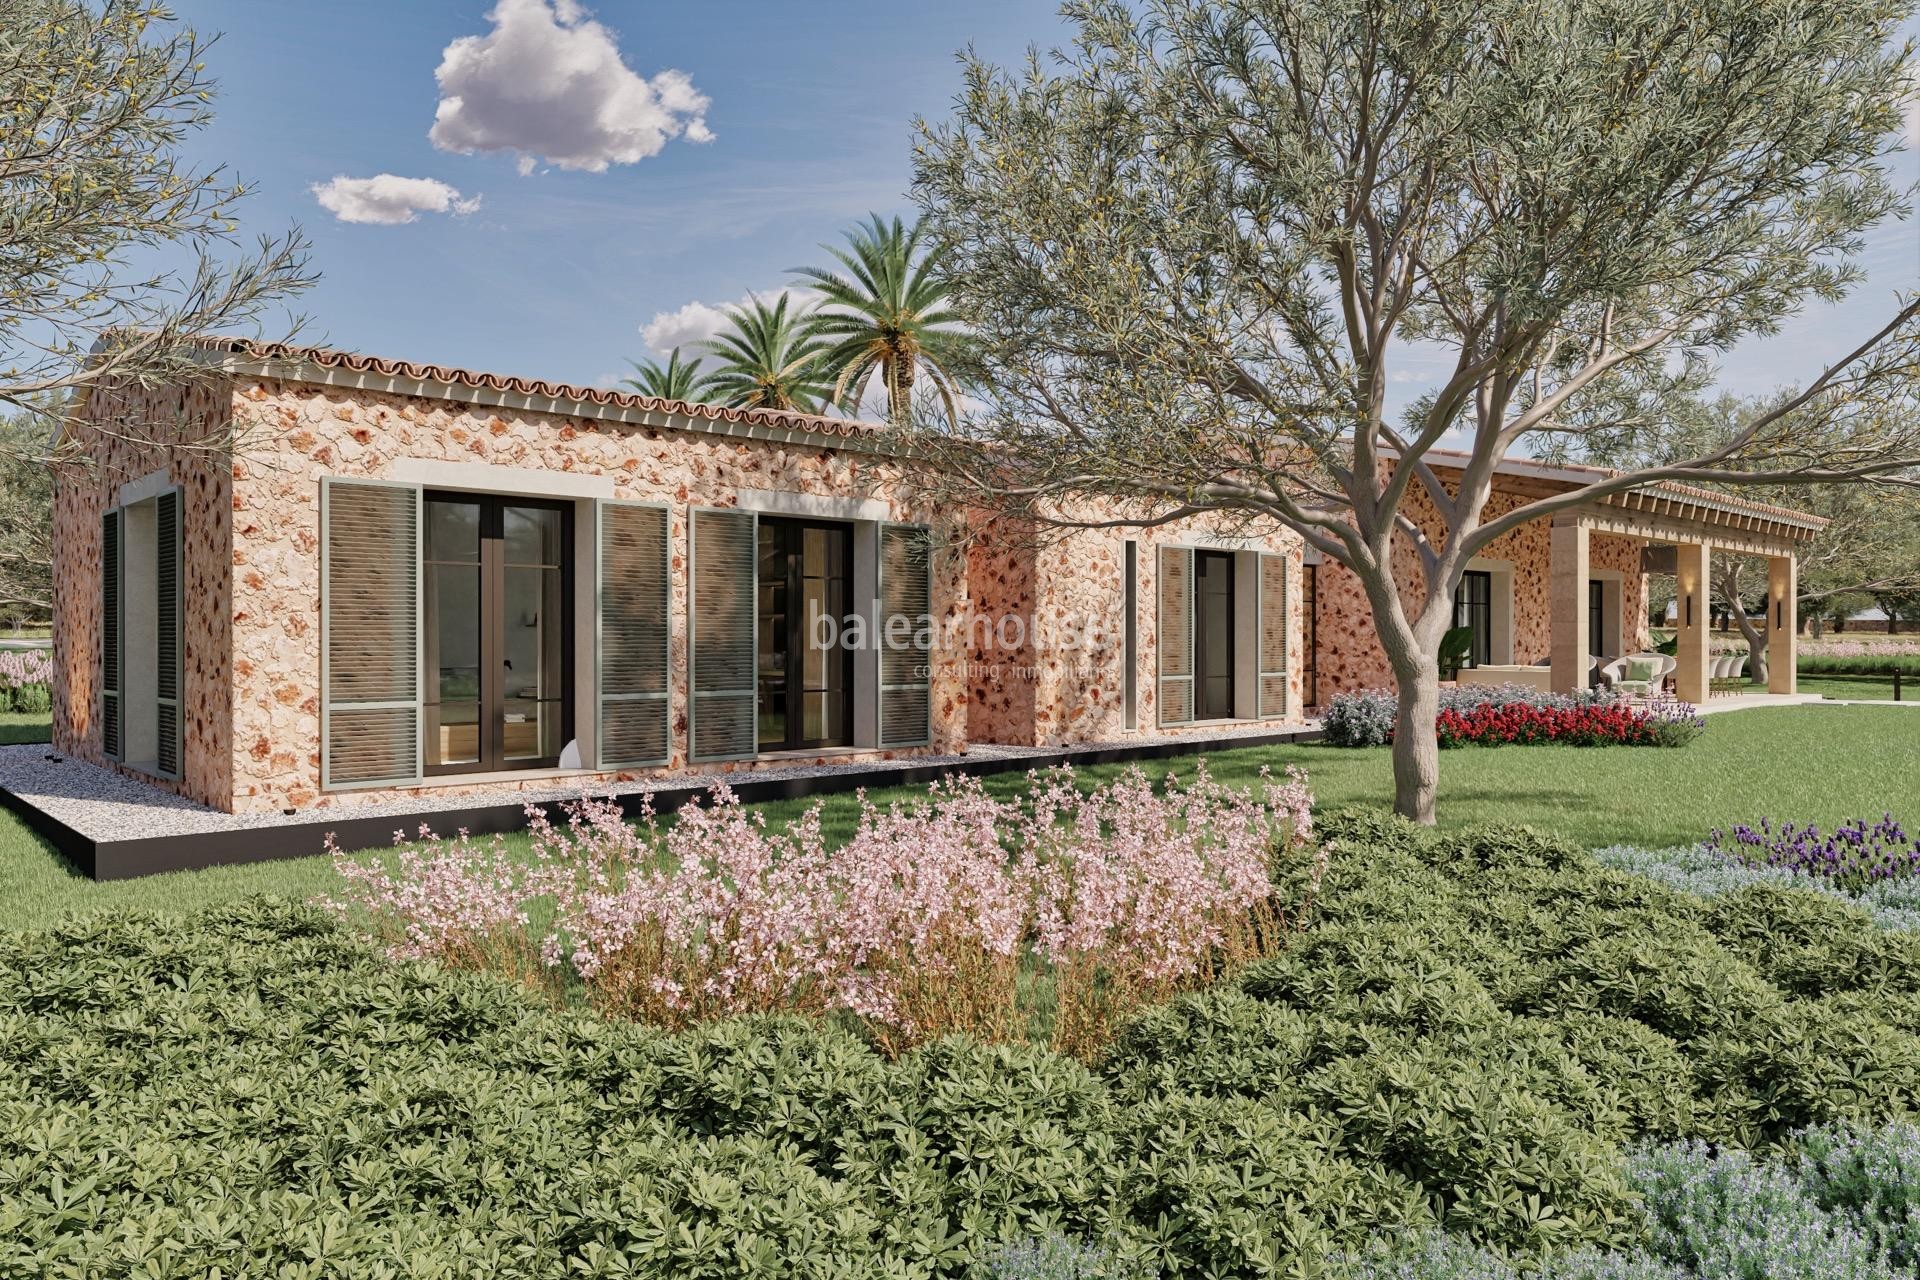 Impeccable new build finca surrounded by nature and the highest qualities in Santa María